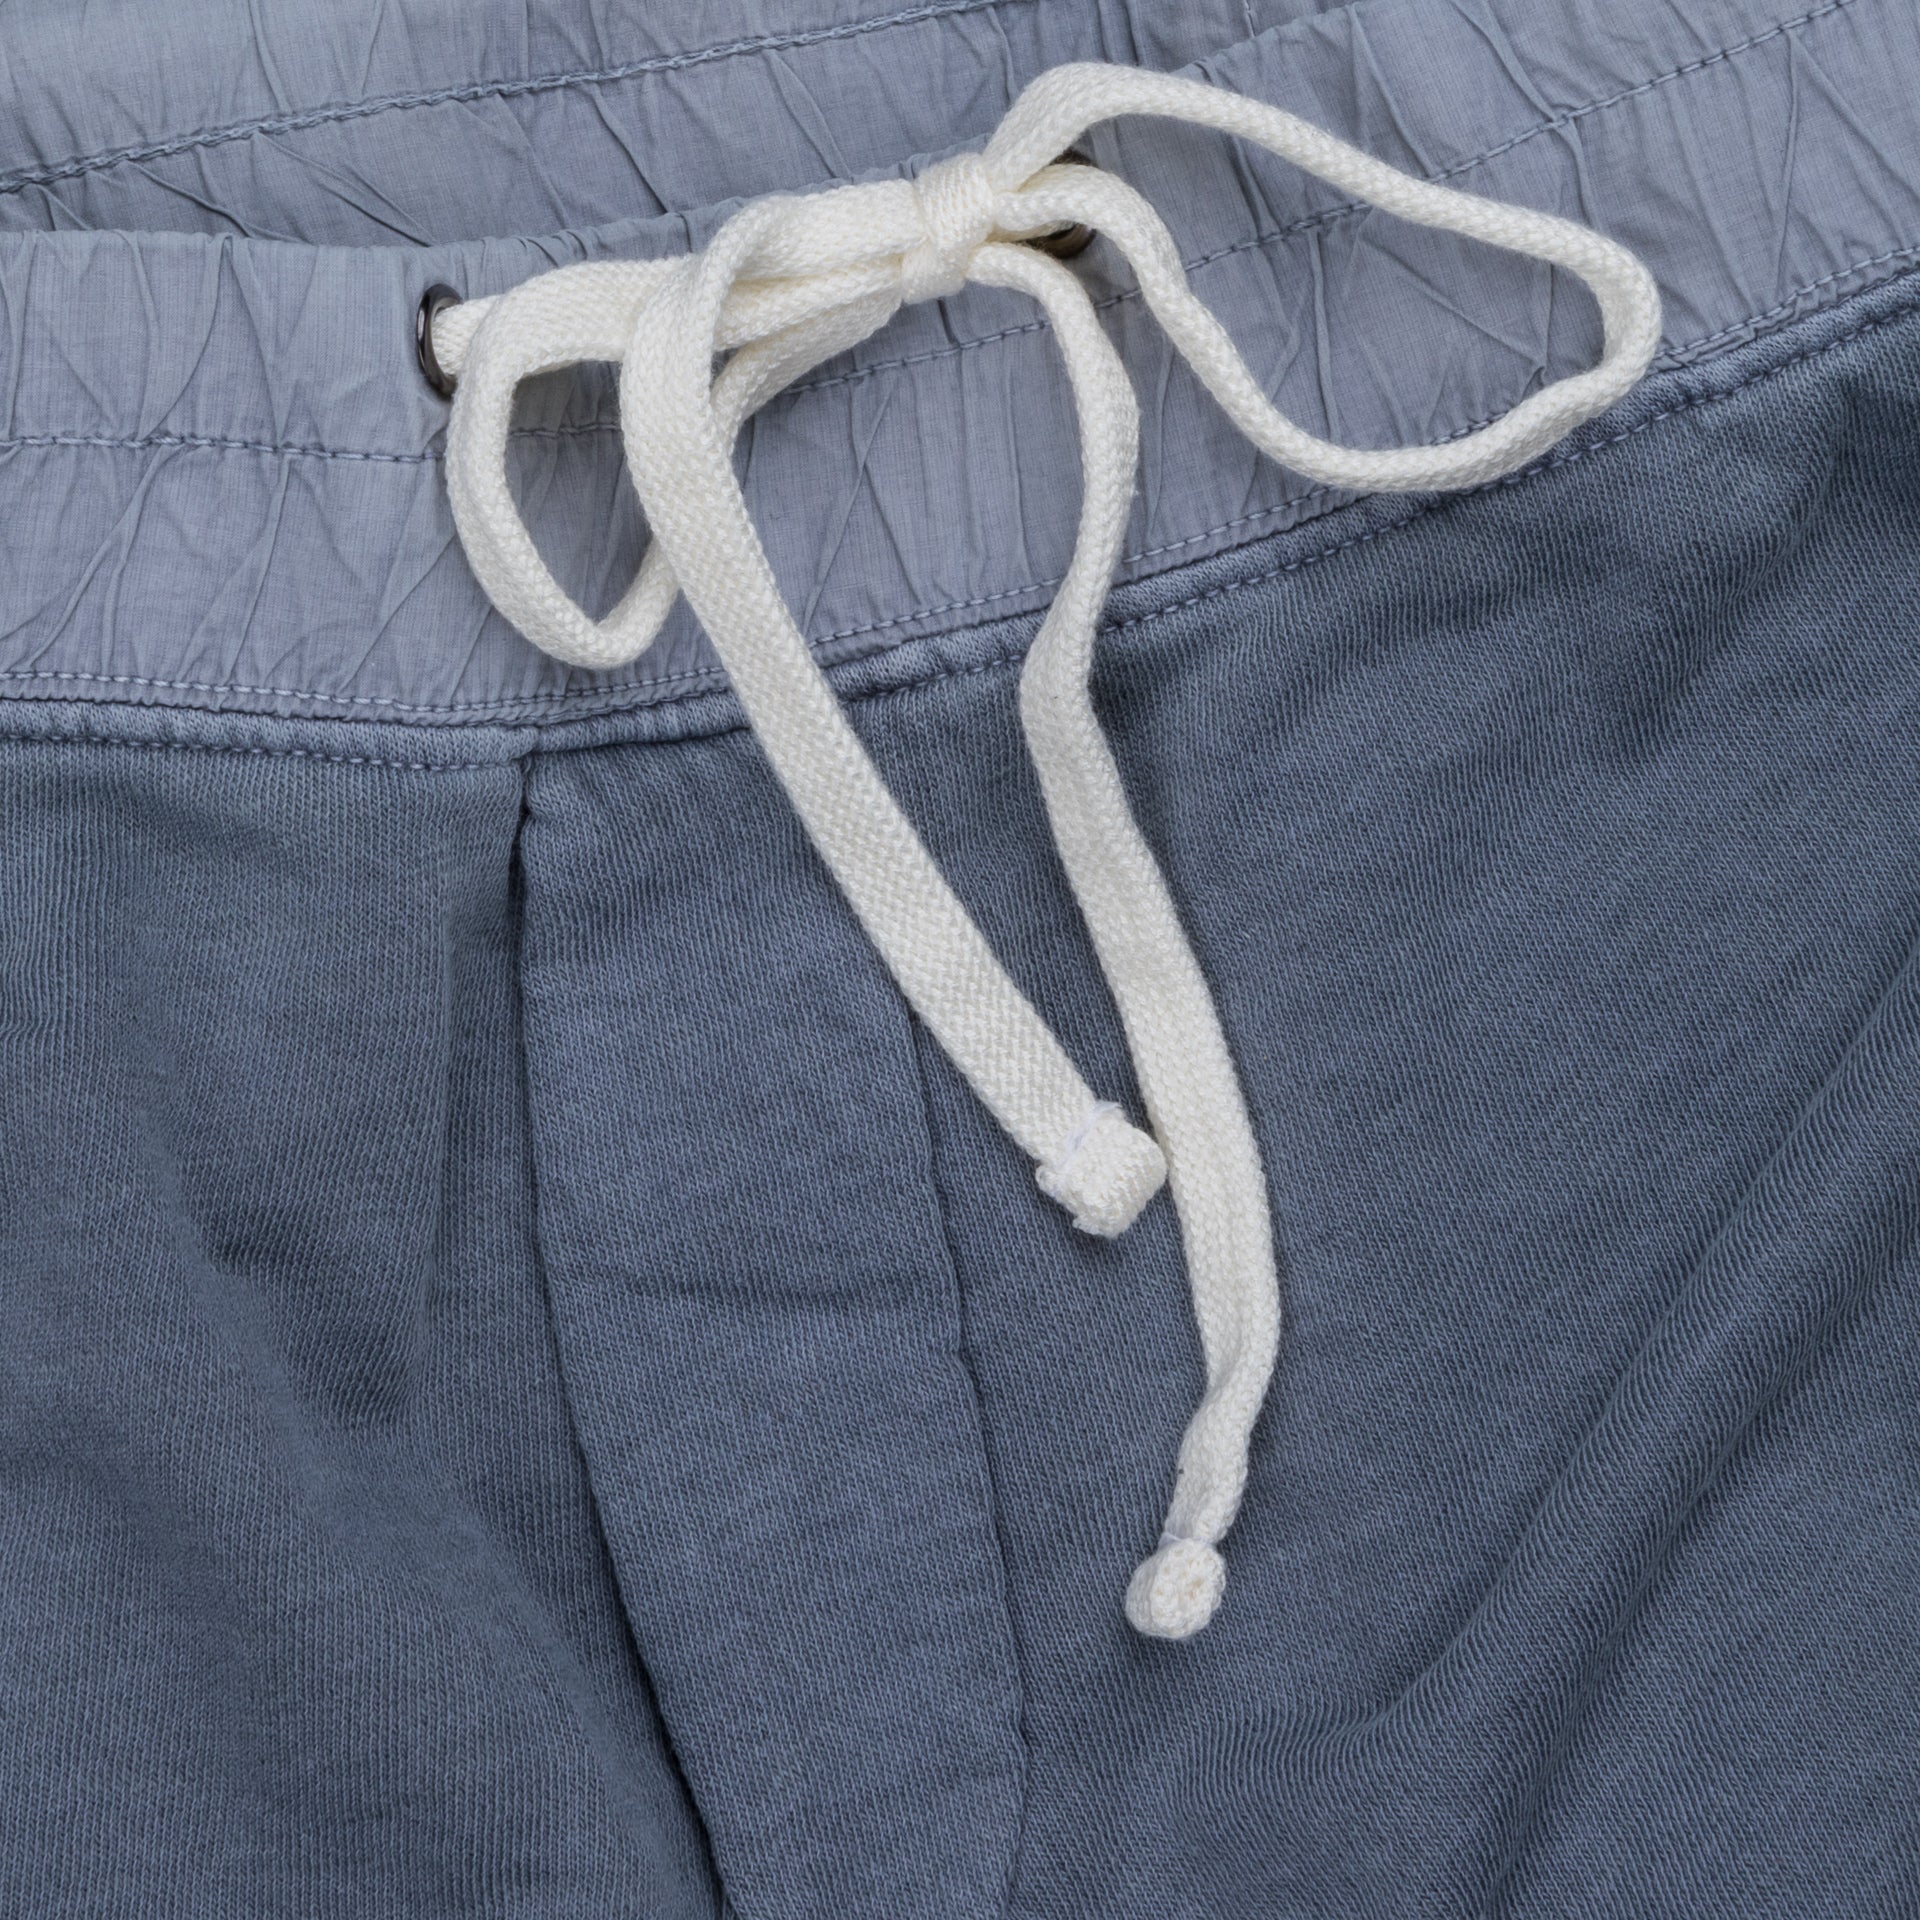 James Perse French Terry Sweat Pants Arsenic Pigment